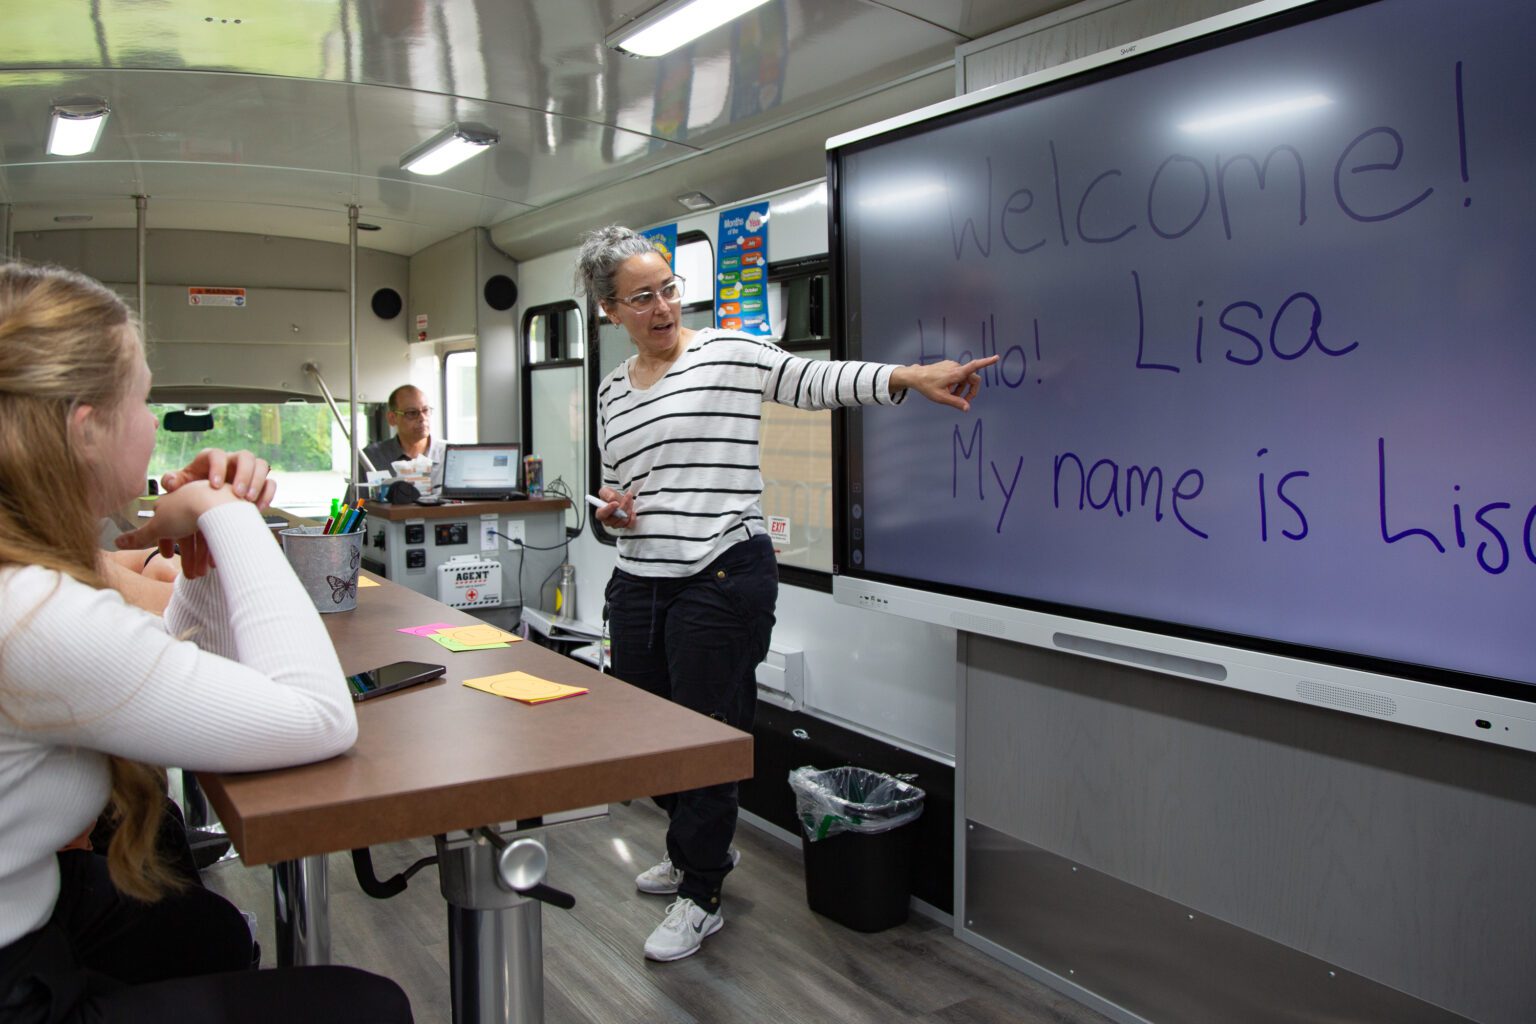 Lisa Brisbois teaches English to speakers of other languages aboard Evergreen Goodwill's Digital Equity Bus in June. Brisbois also teaches at Western Washington University and is headed to Latvia to instruct students on how to teach English in a 10-month fellowship.